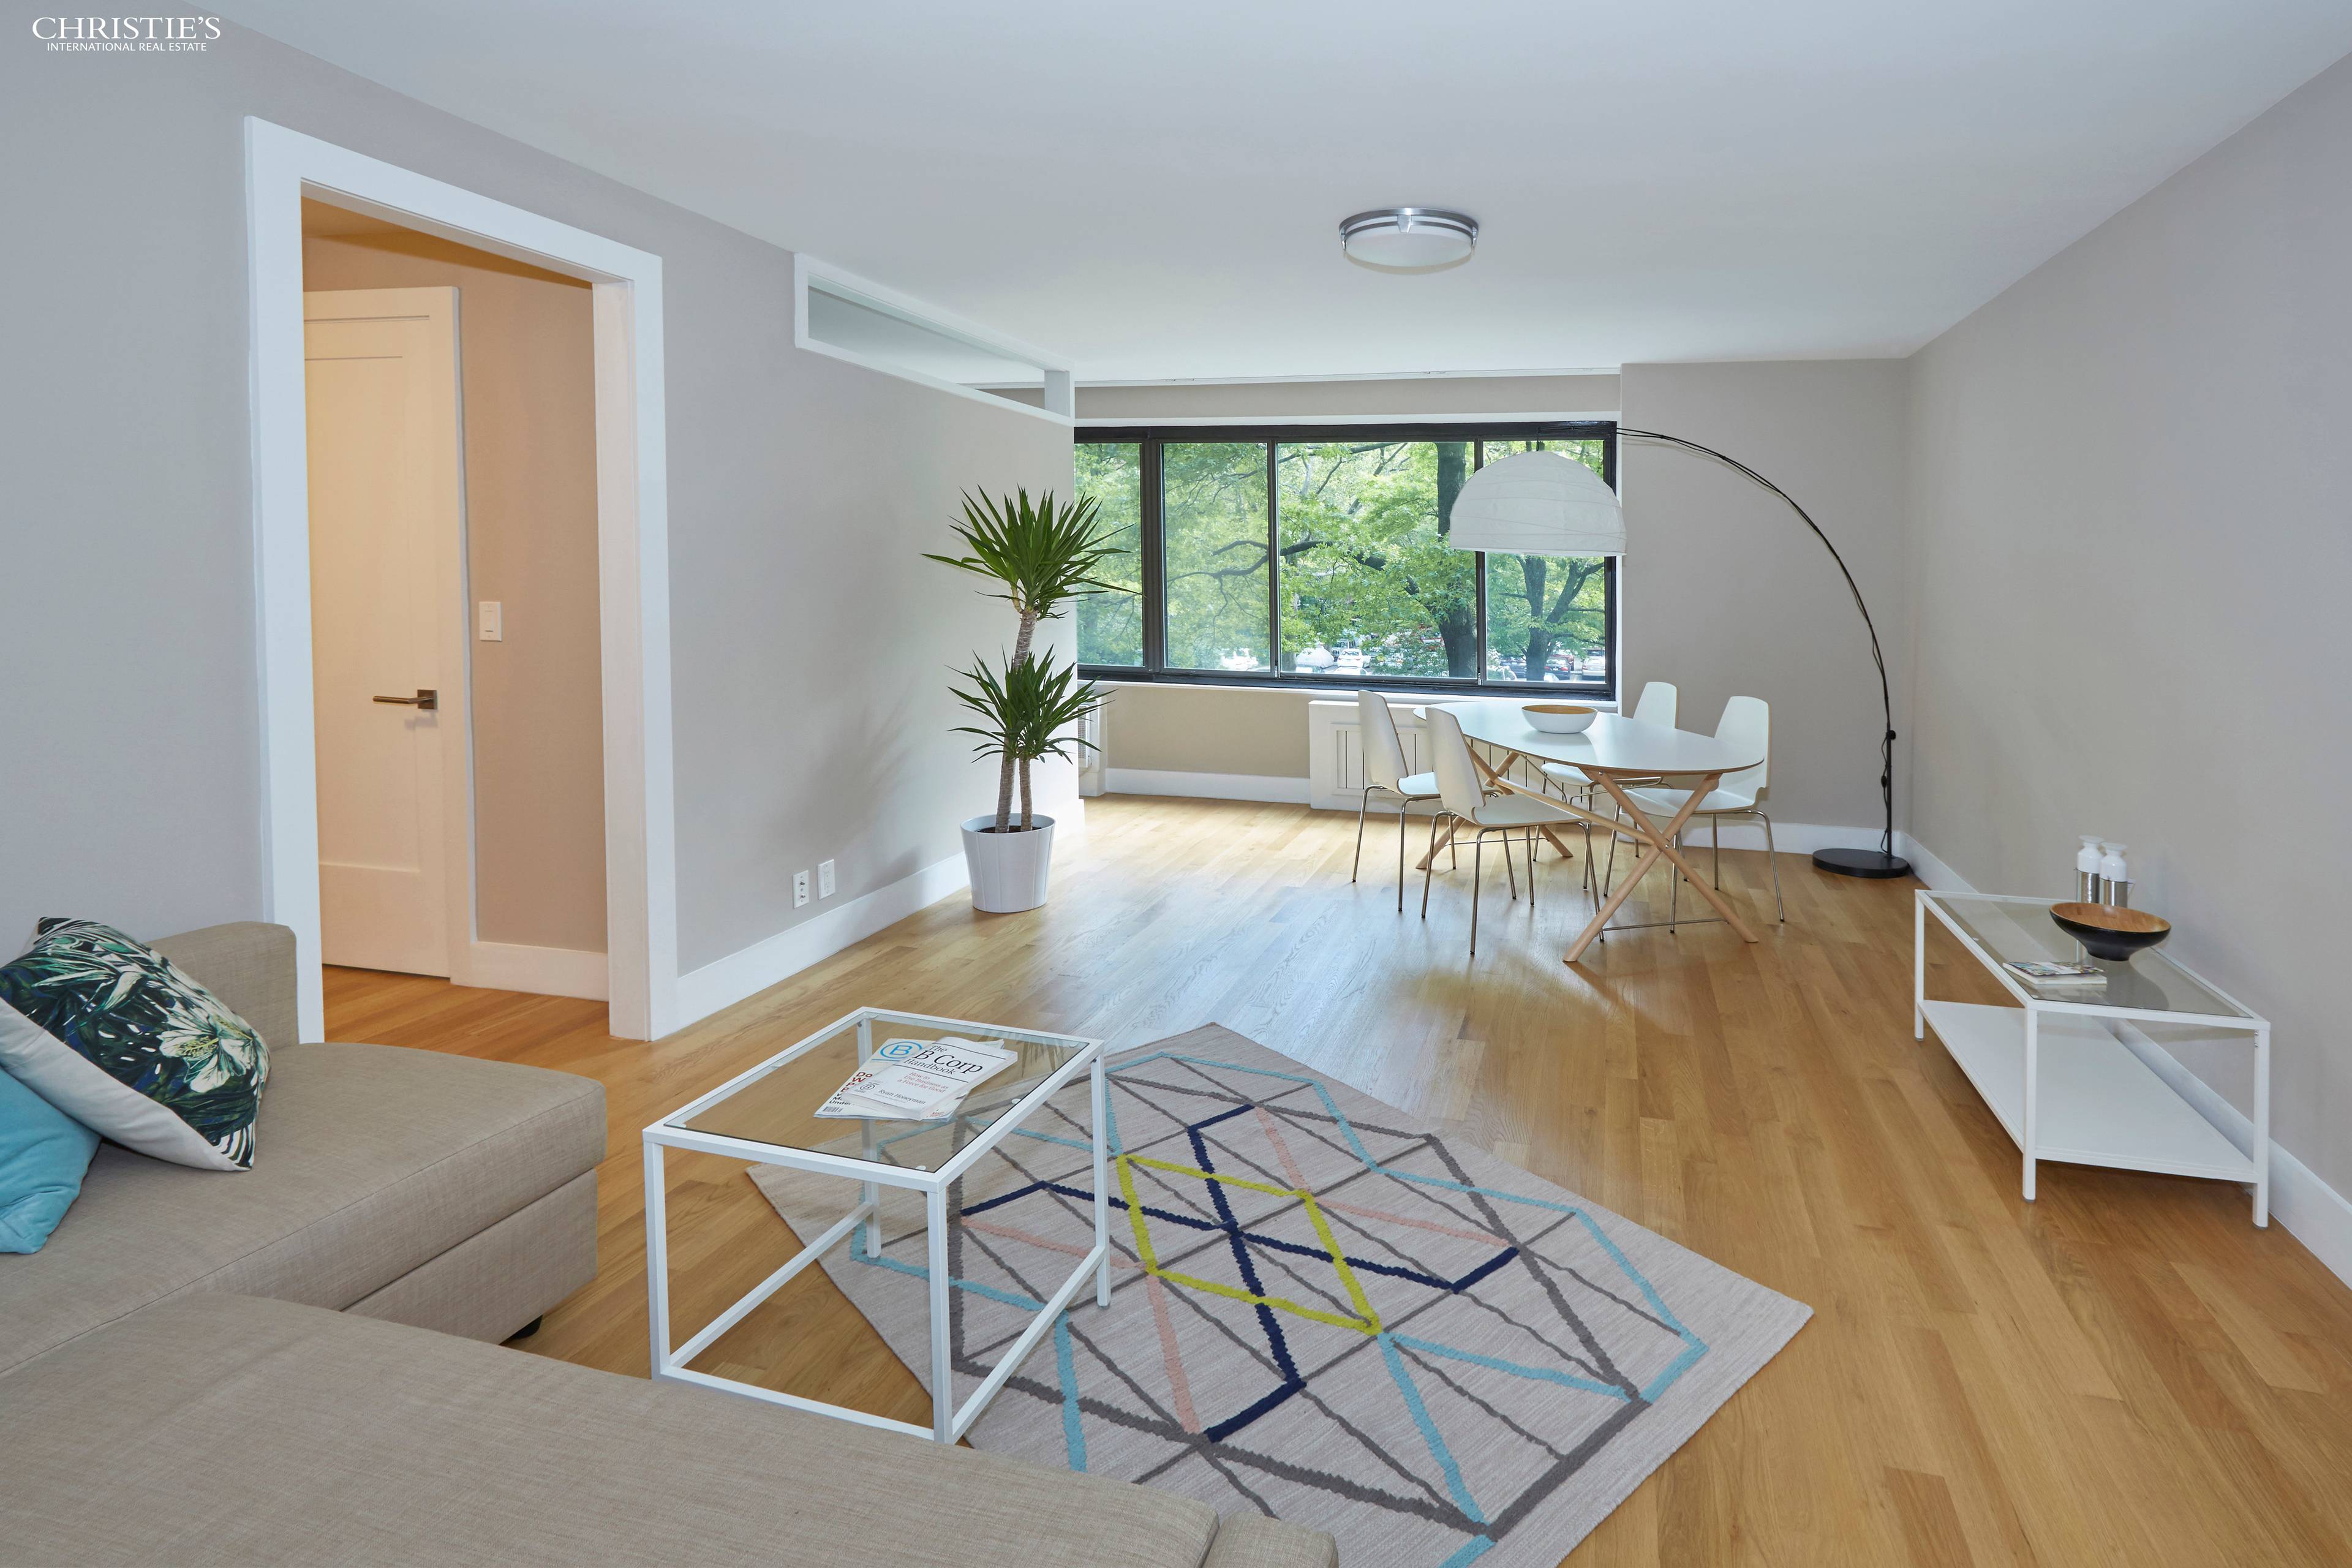 PRISTINE JUNIOR 1 BEDROOM This renovated Junior one bedroom offers open north views with a peek of Central Park, situated within a prime full service condominium.